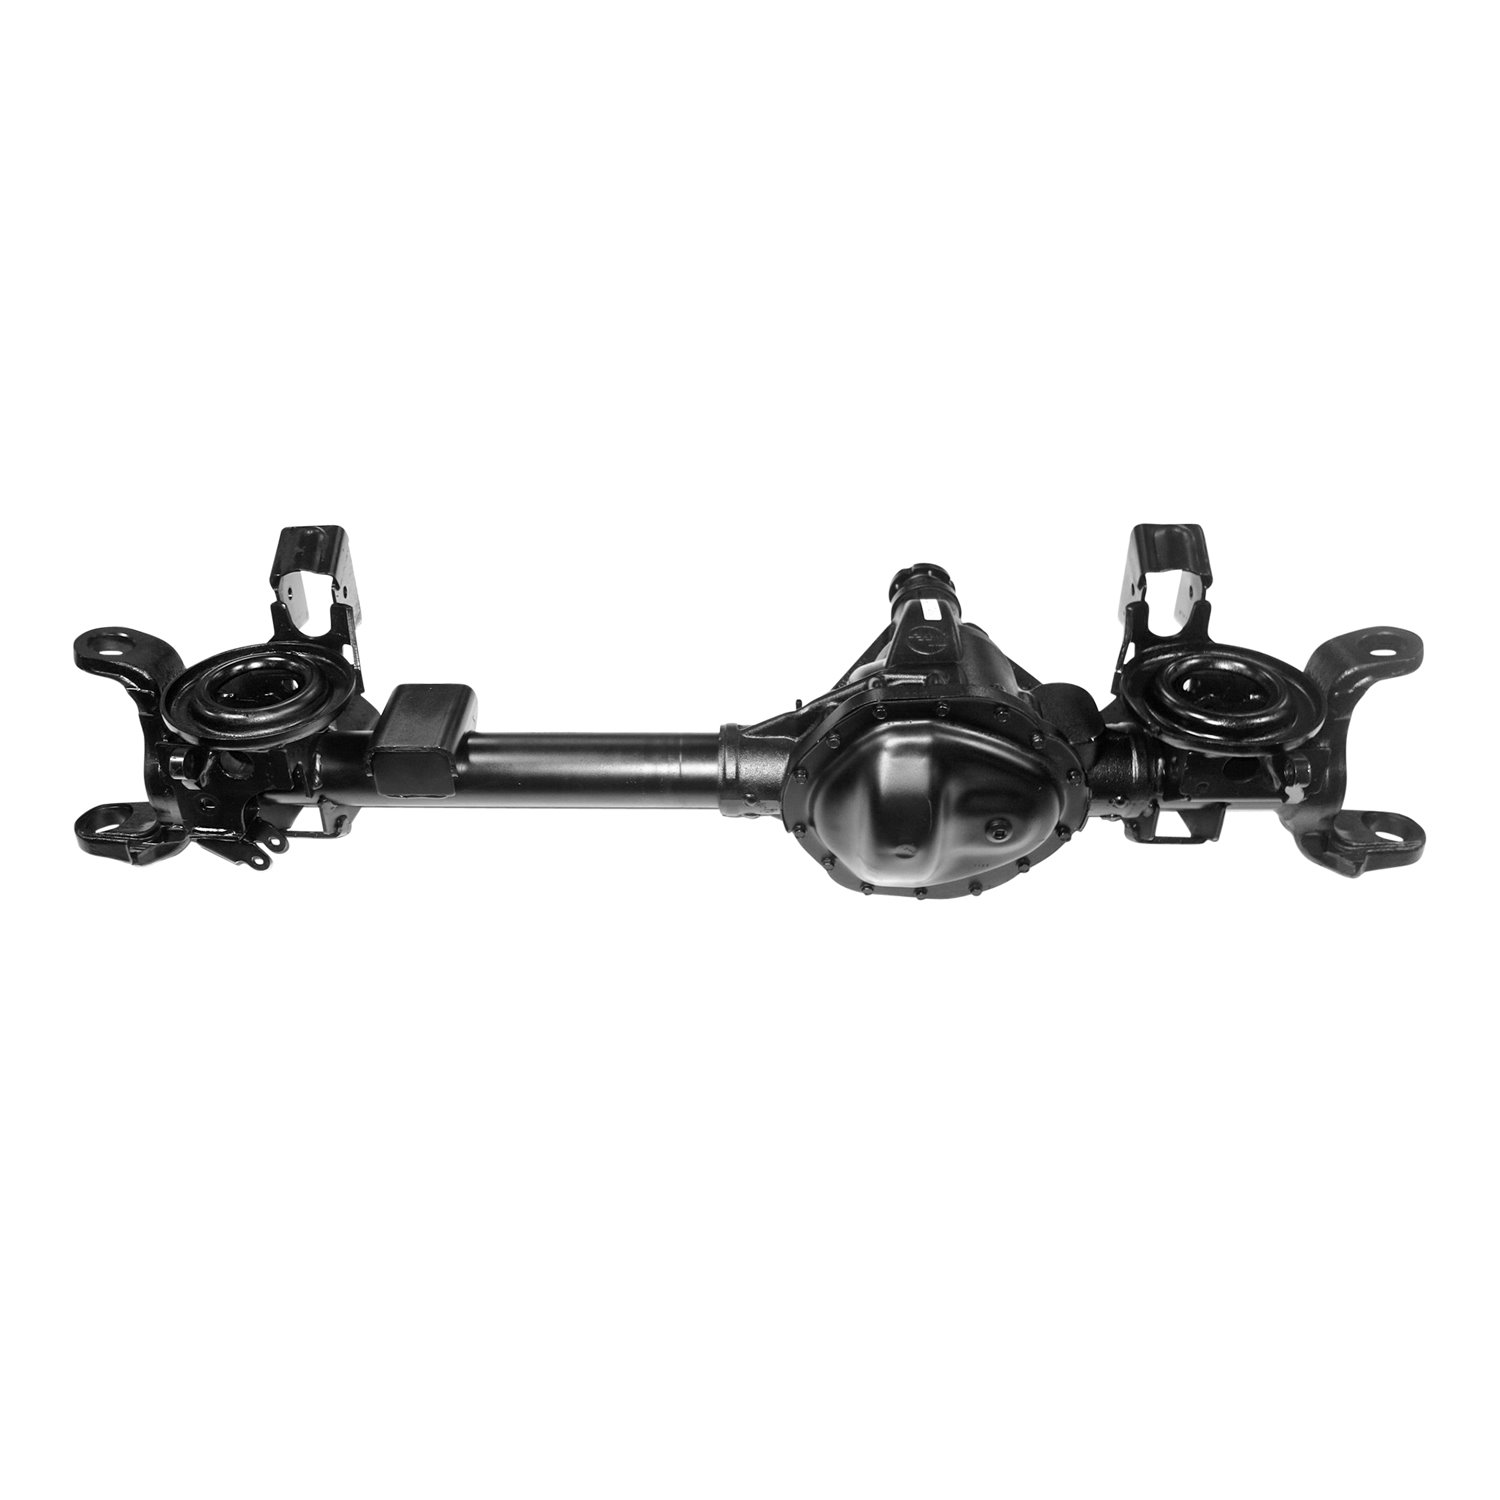 Remanufactured Front Axle Assembly 9.25" 2013 Ram 2500 & 3500 3.73